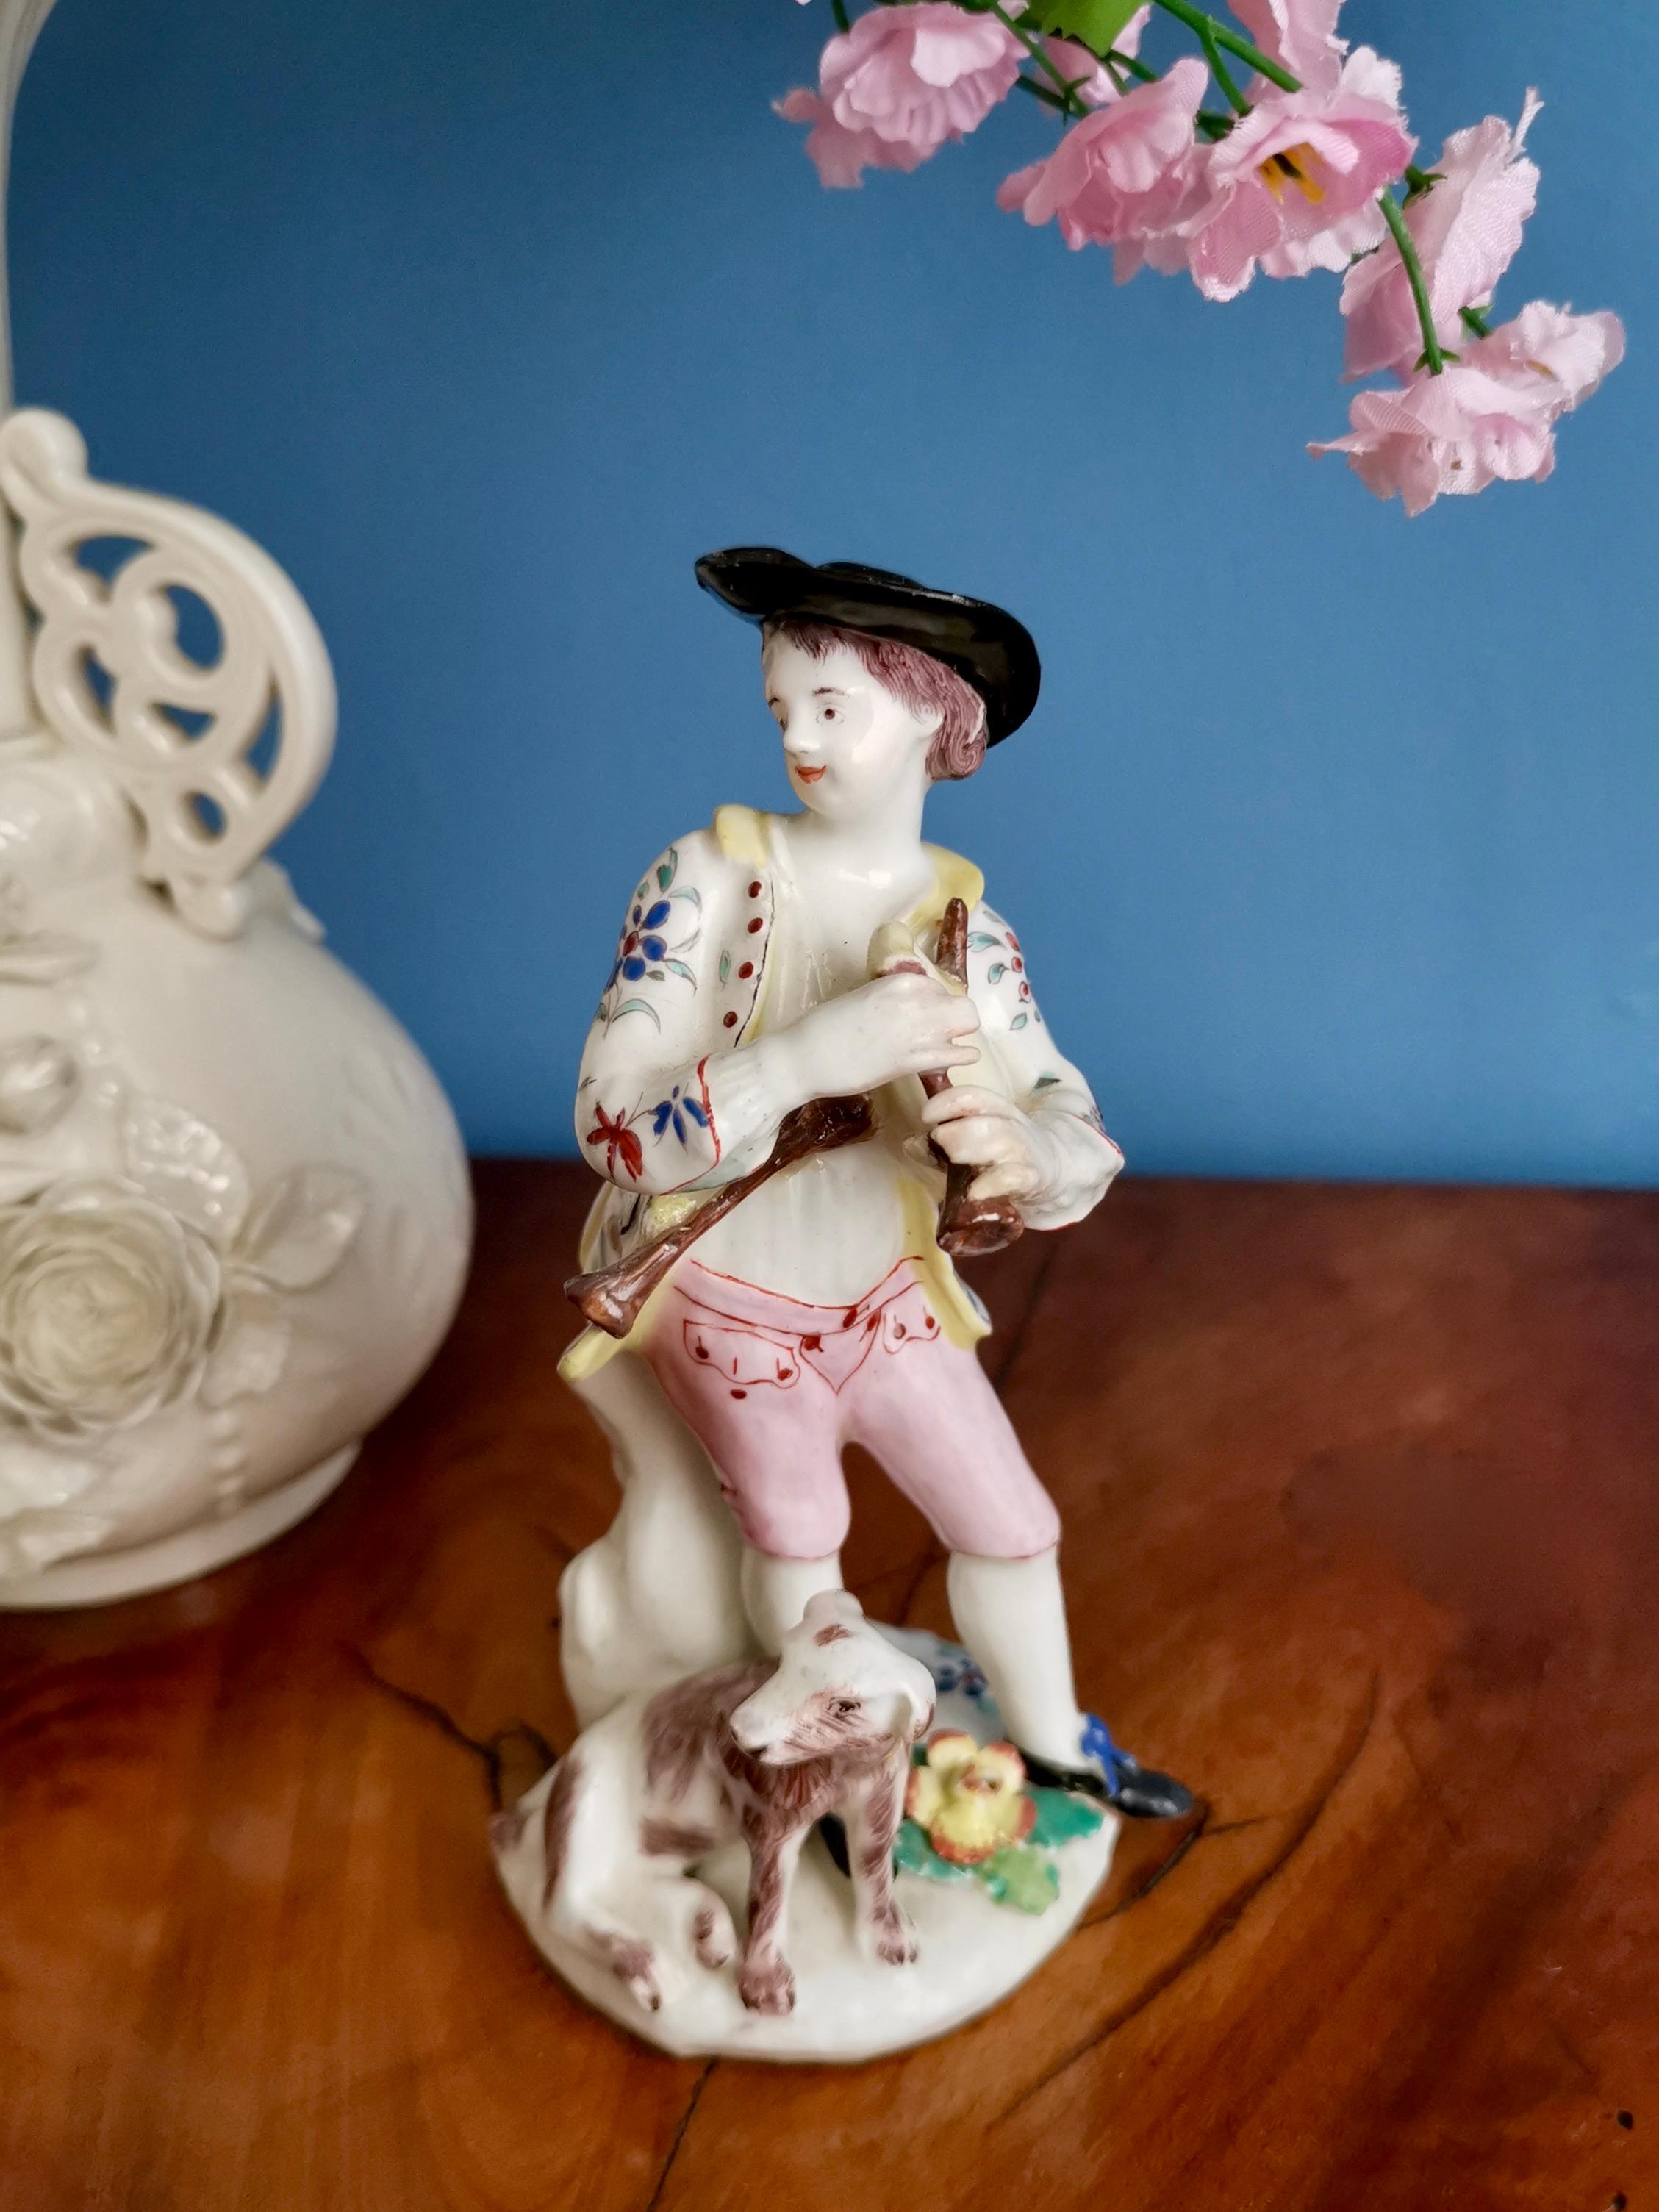 This is a wonderful figure of a shepherd boy piper made by the Bow Porcelain factory in circa 1755.

The Bow Porcelain Factory was one of the first potteries in Britain to make soft paste porcelain, and most probably the very first to use bone